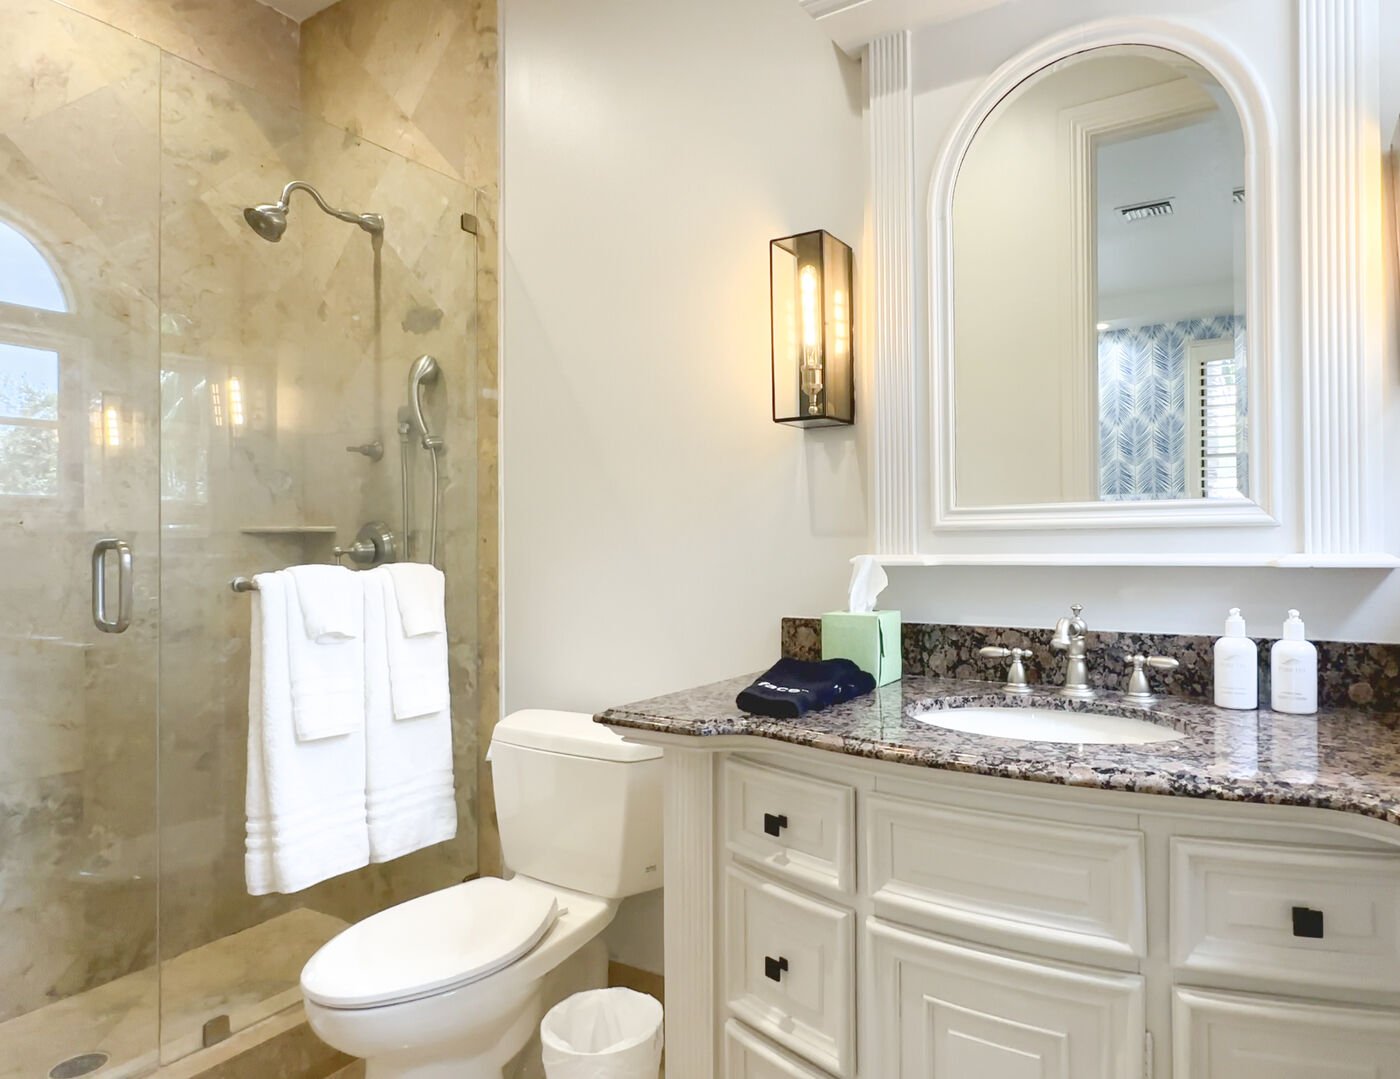 The blue palm bedroom features a bathroom with a walk in shower.